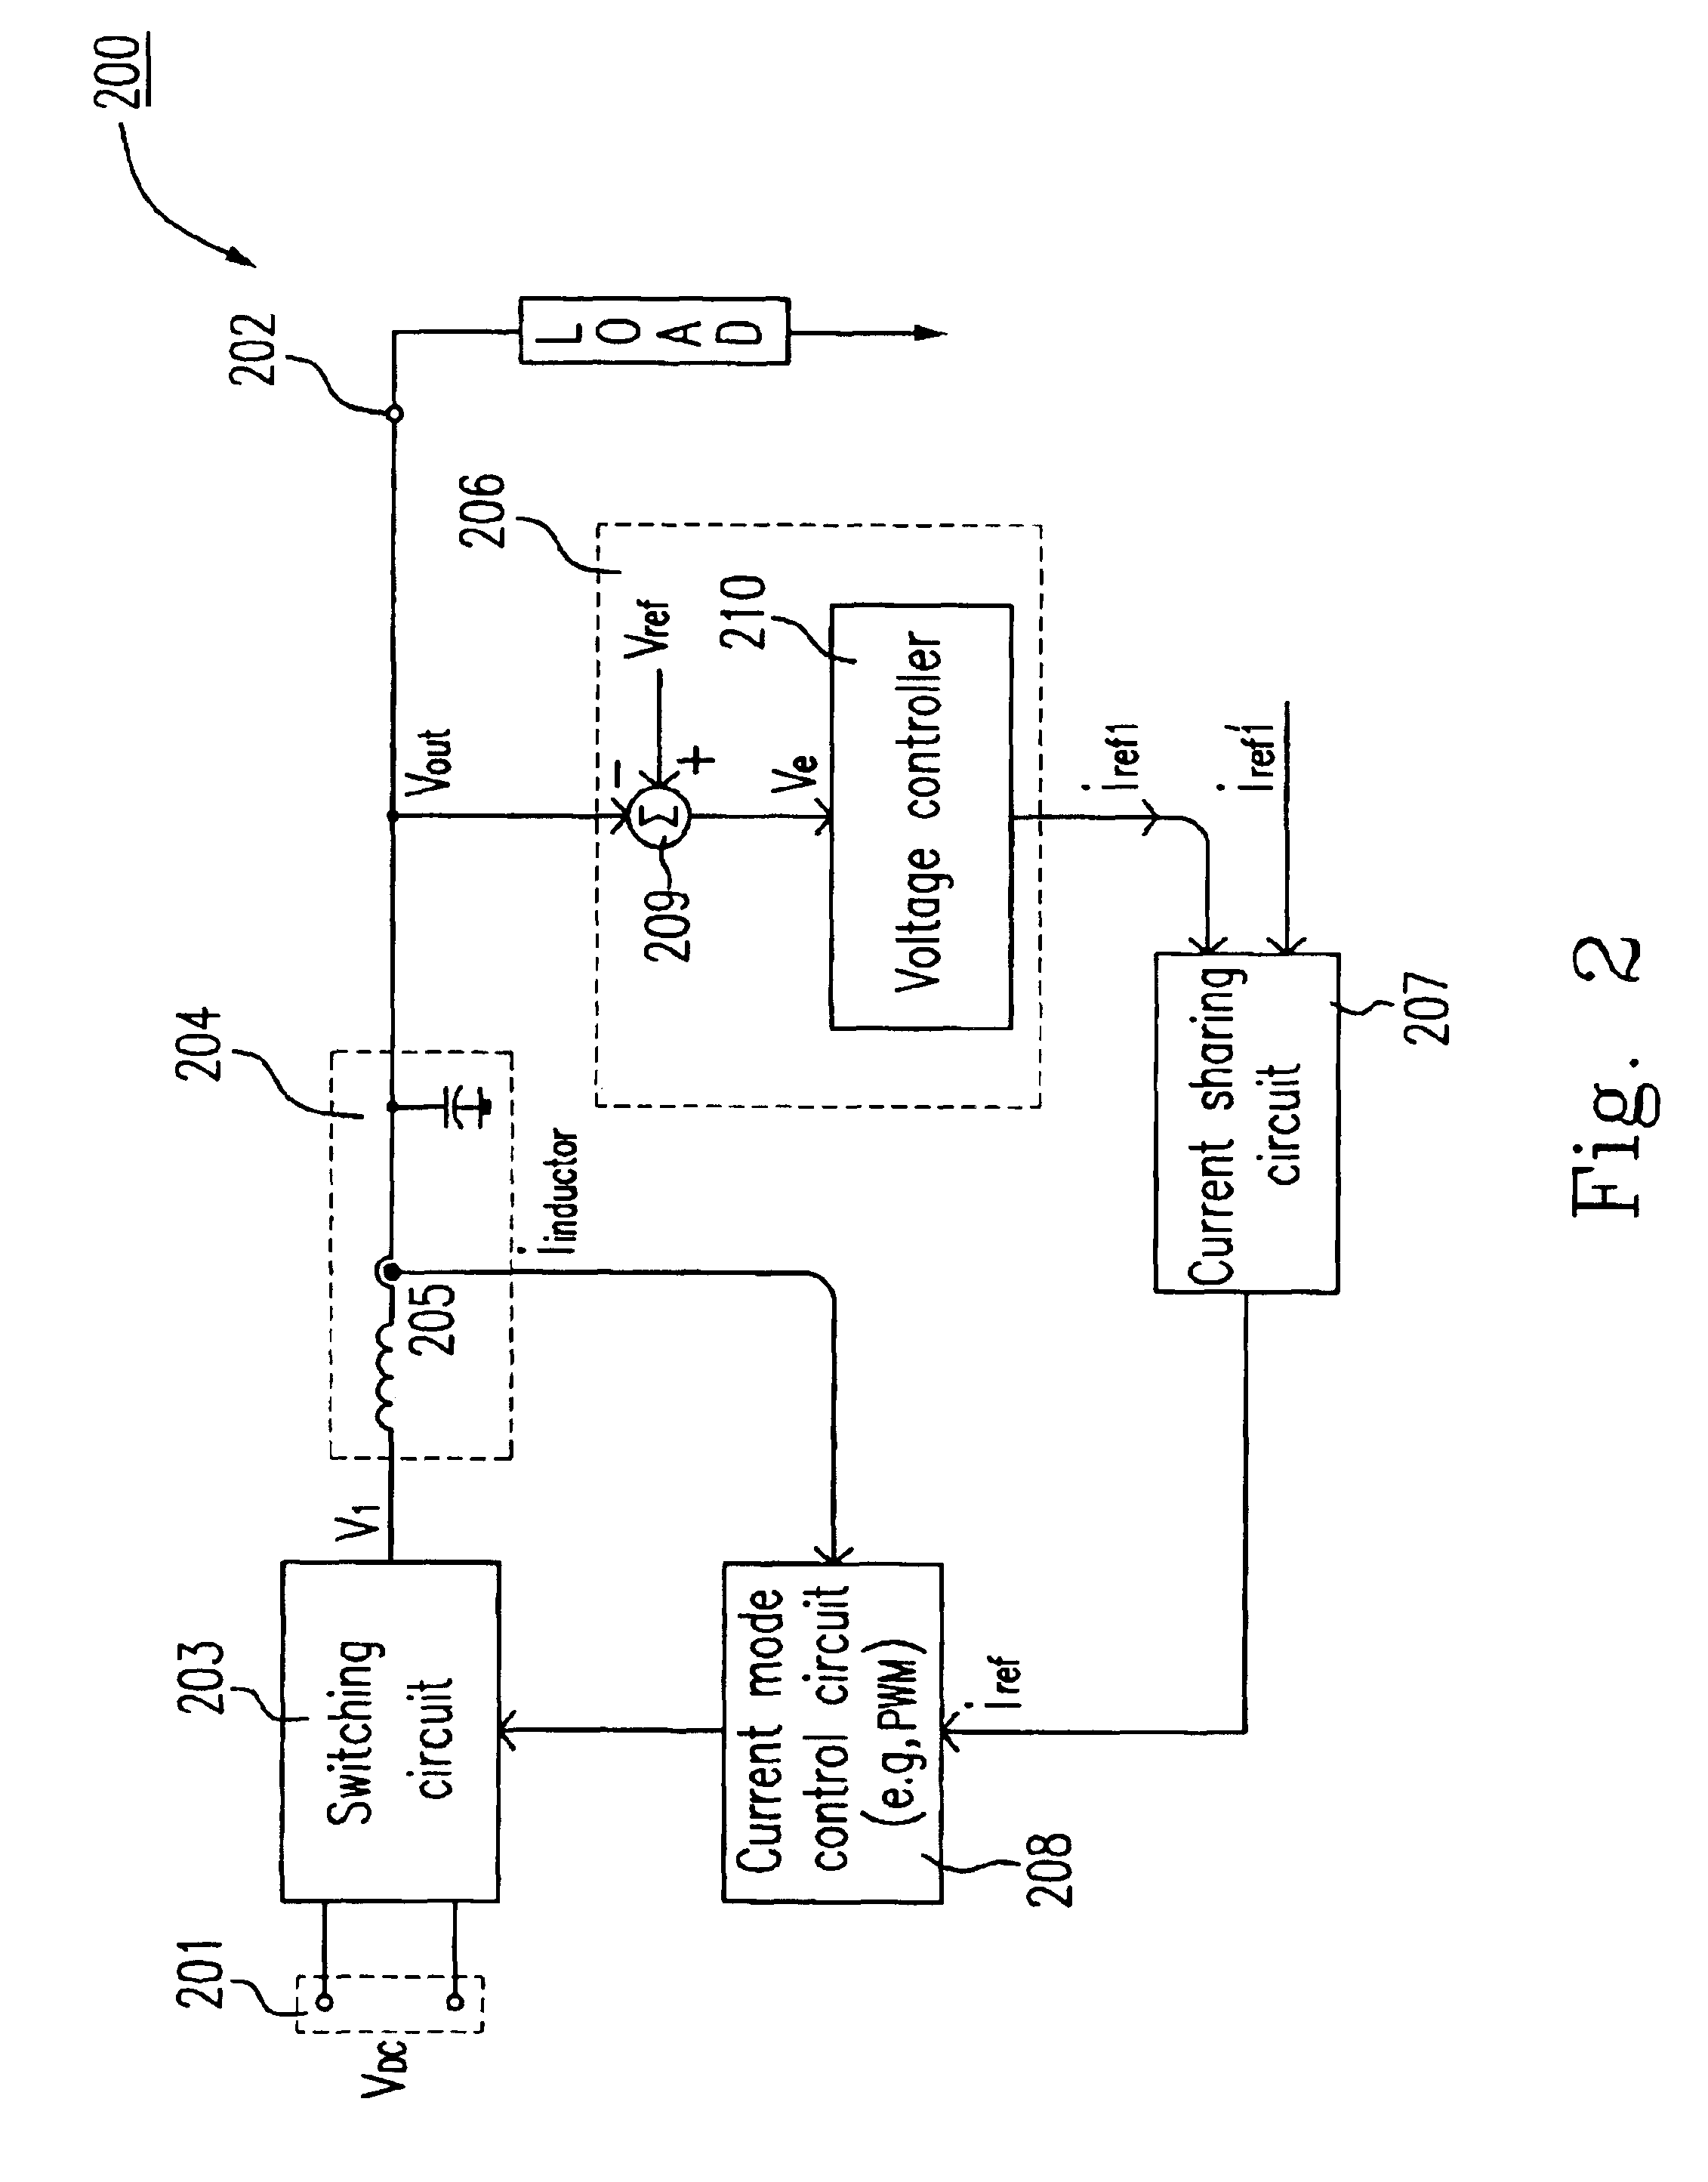 Parallel DC-to-AC power inverter system with current sharing technique and method thereof